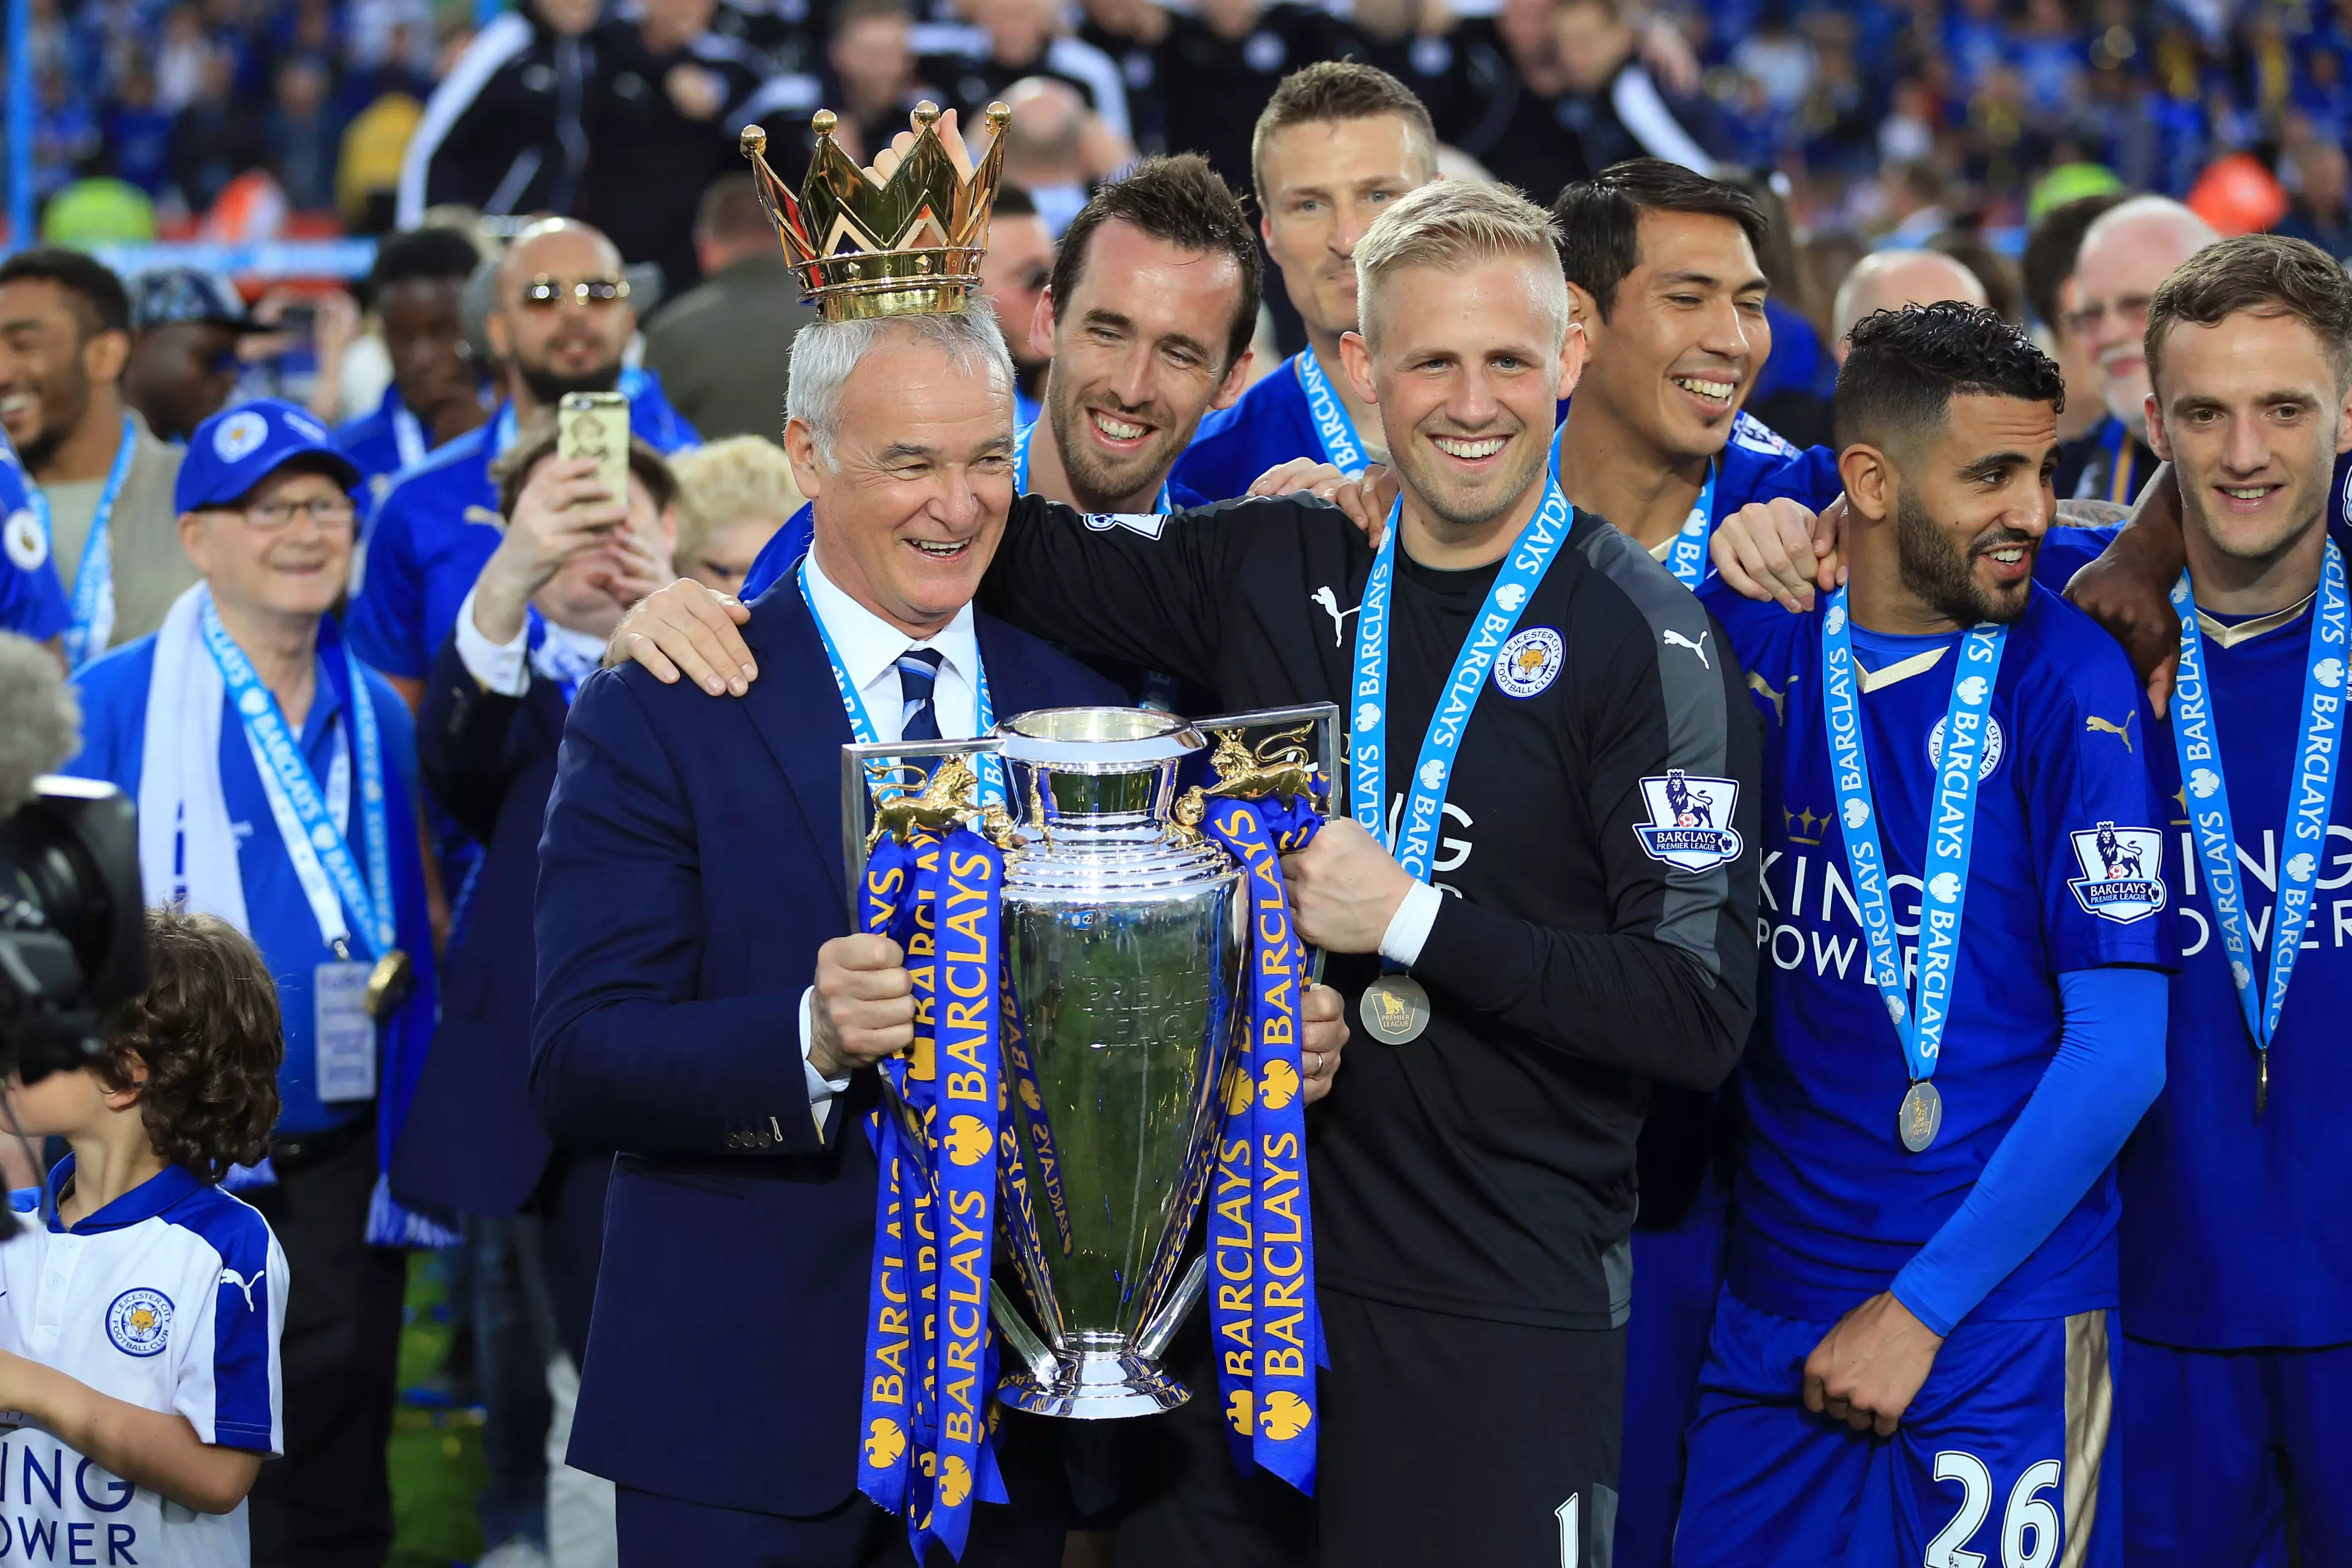 The Four Leicester City Players Who Attended Meeting That Led To Ranieri's Sacking